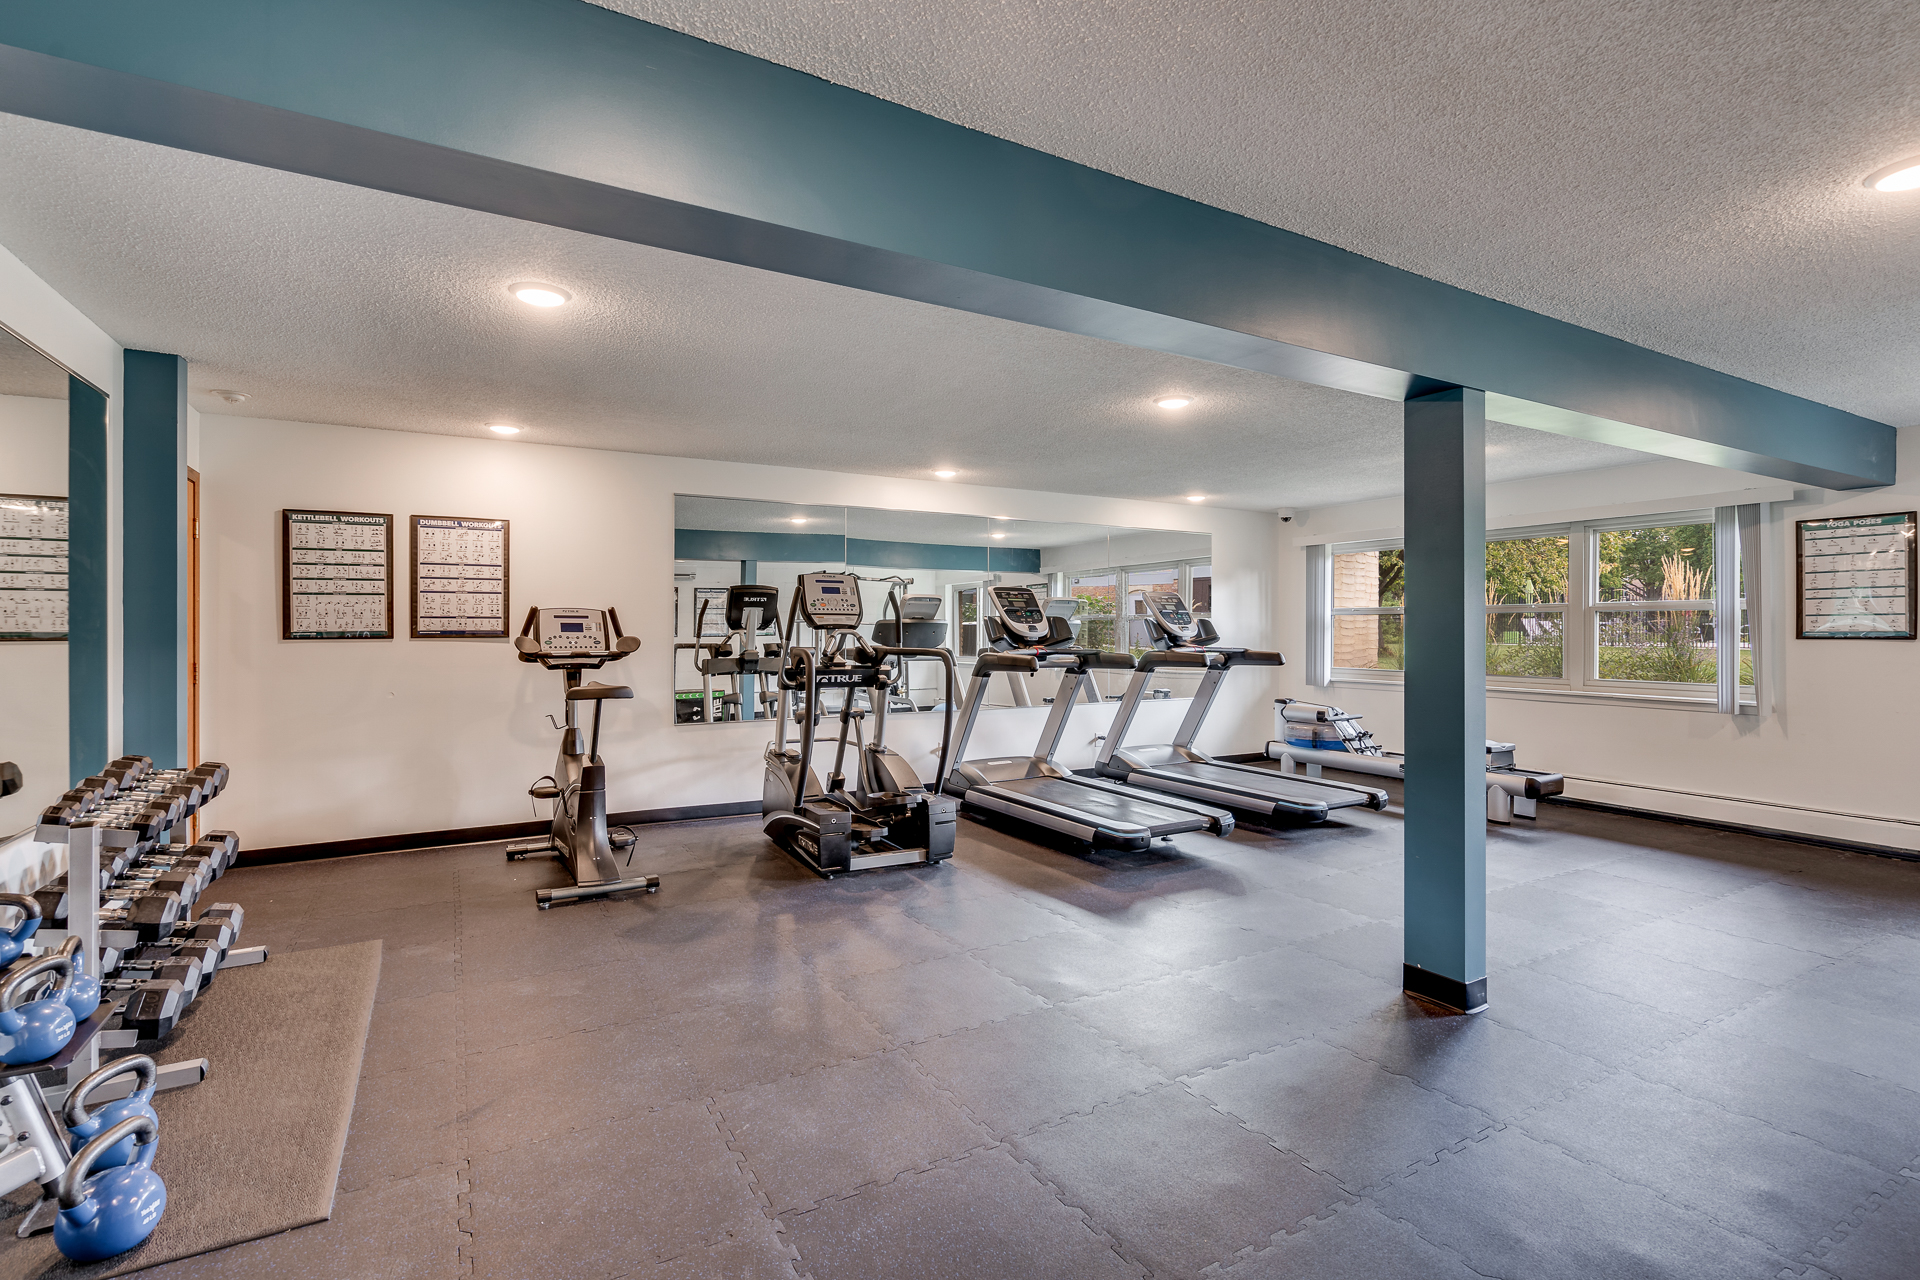 Cardio Equipment In Fitness Center At Sumter Green Apartments In Crystal, MN